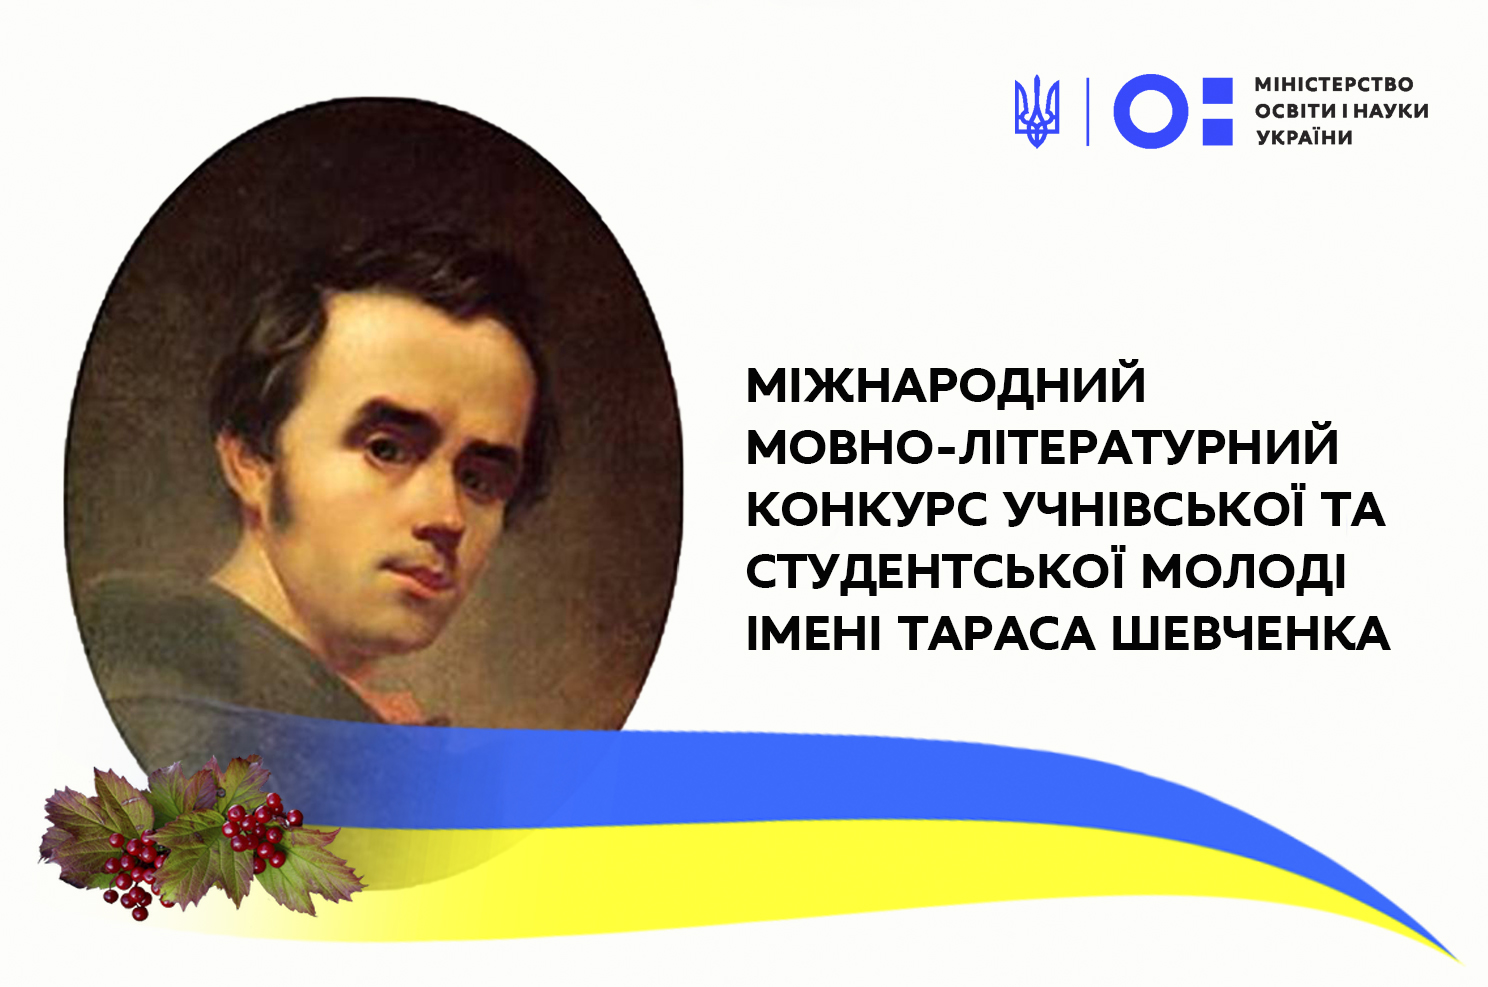 The winners of the first stage of the XIII Taras Shevchenko International Language and Literary Competition for Pupils and Student Youth are determined